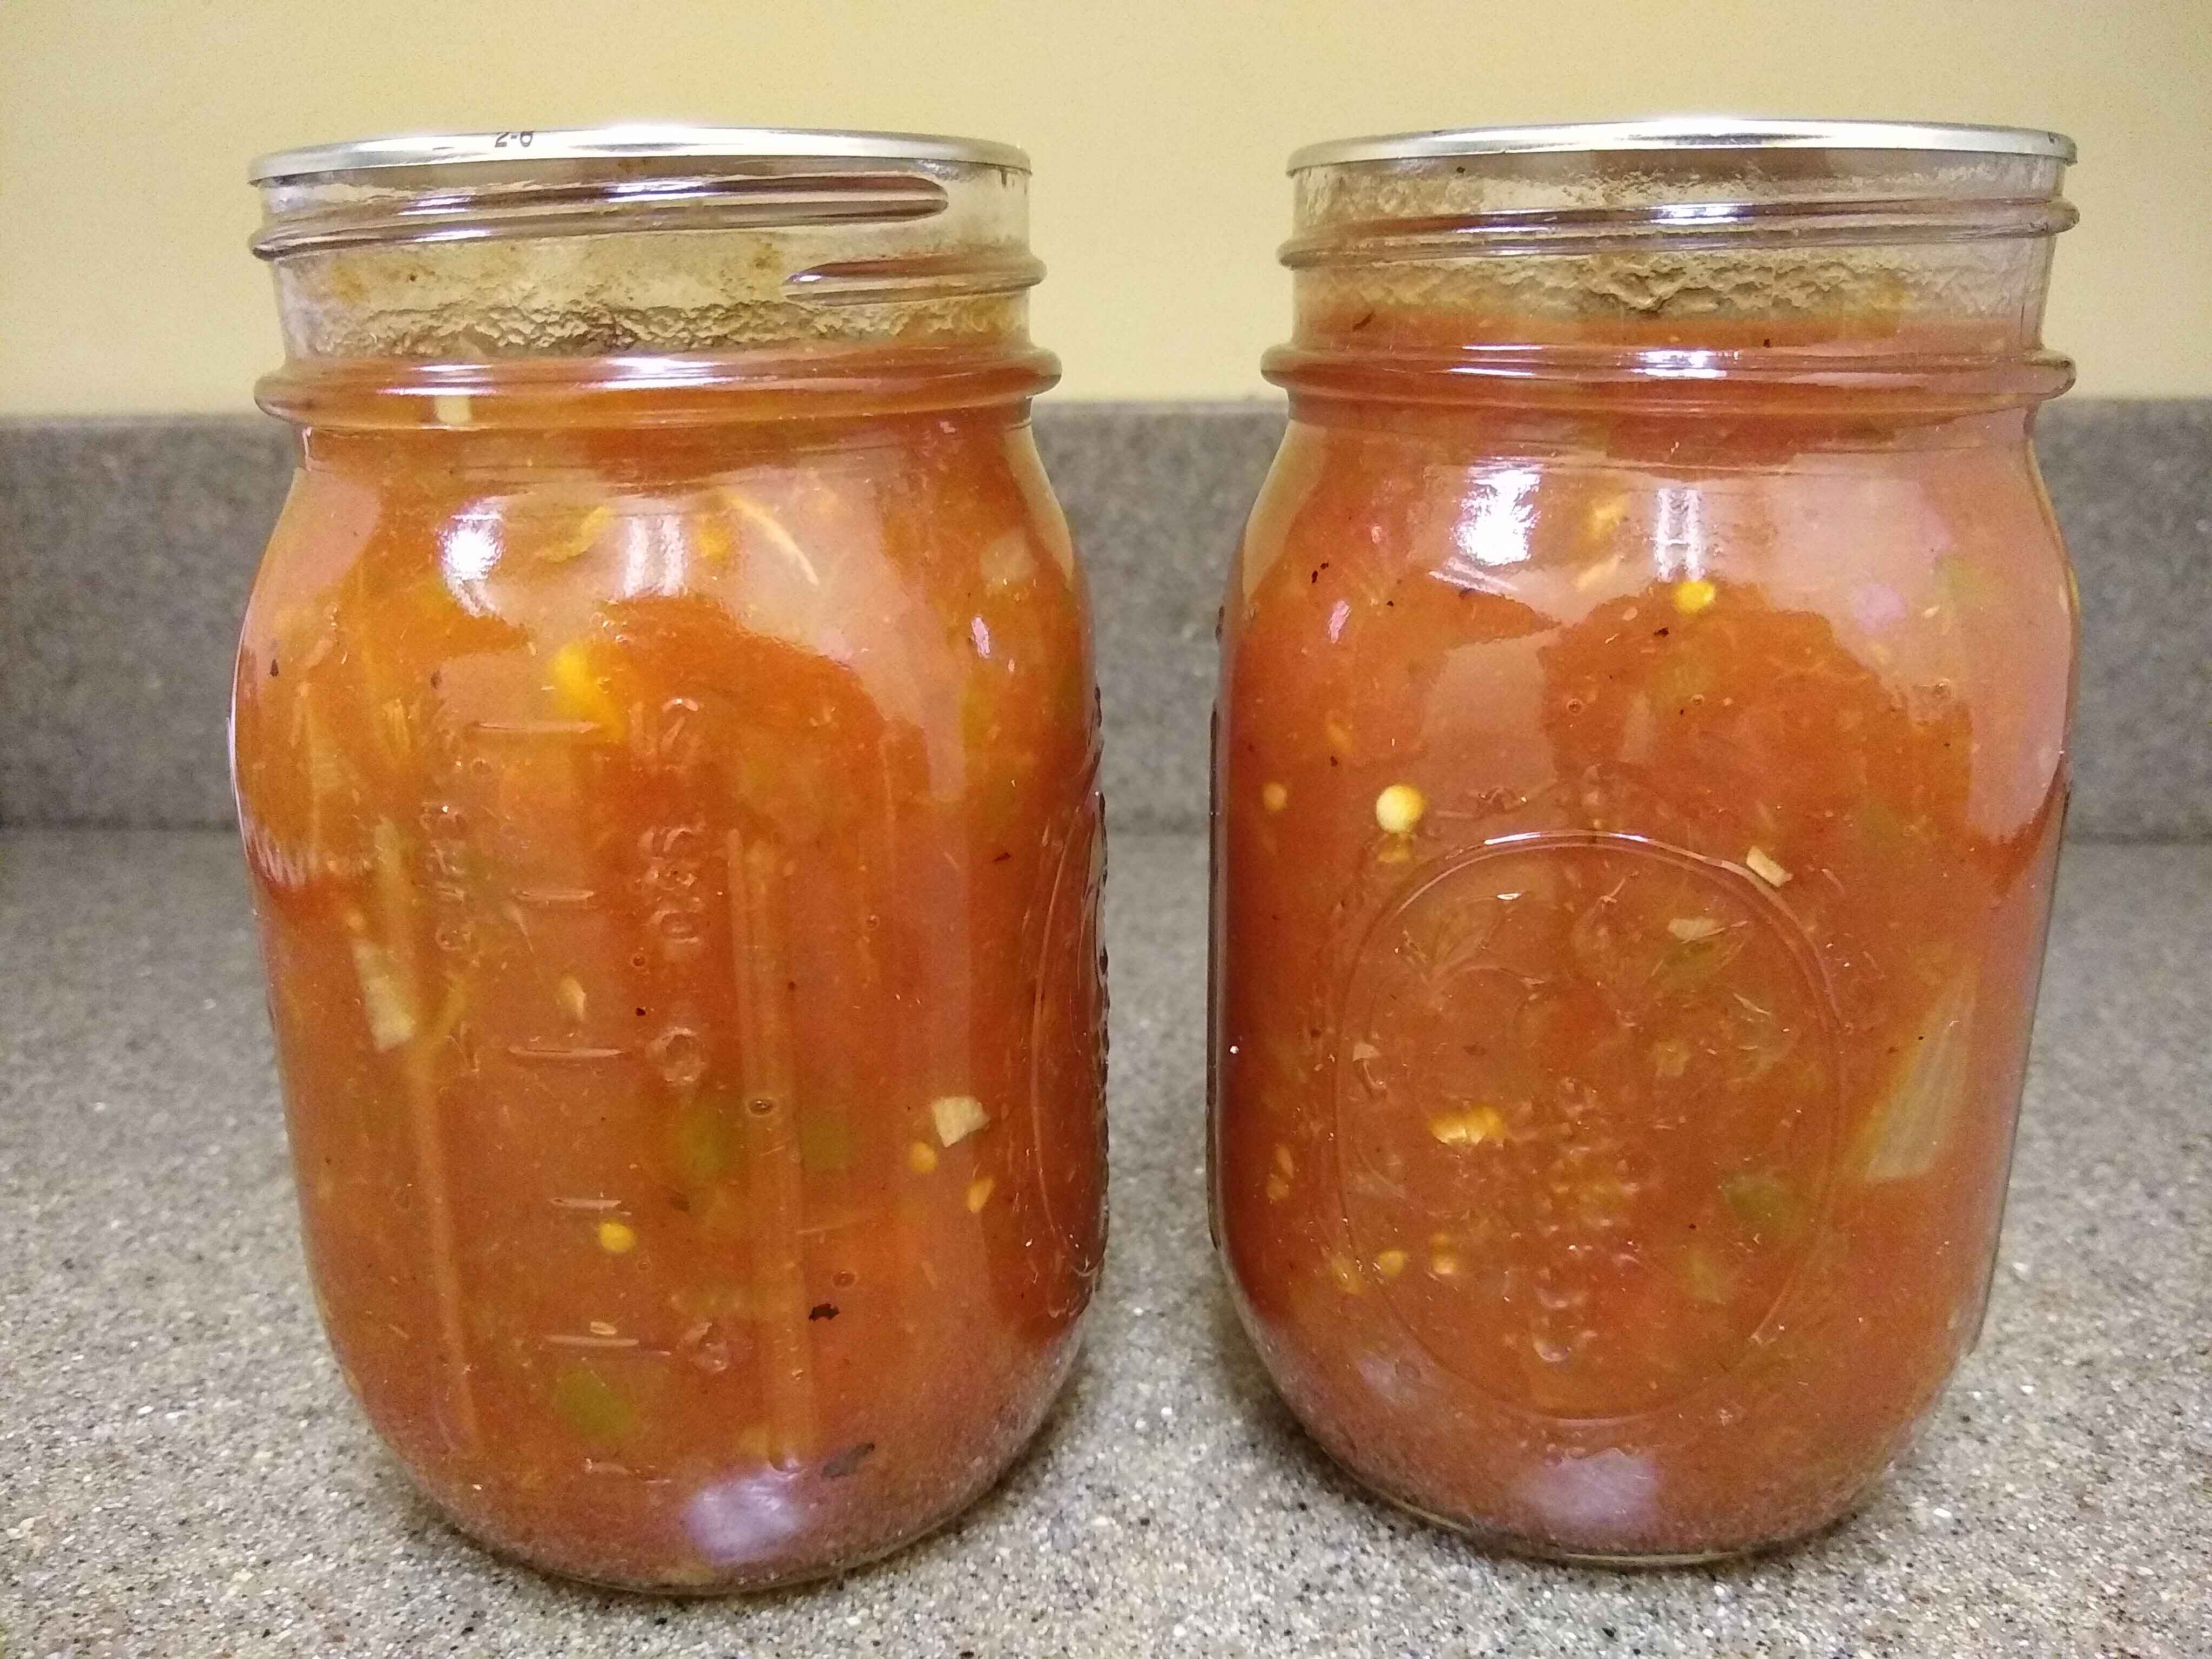 Home canned salsa